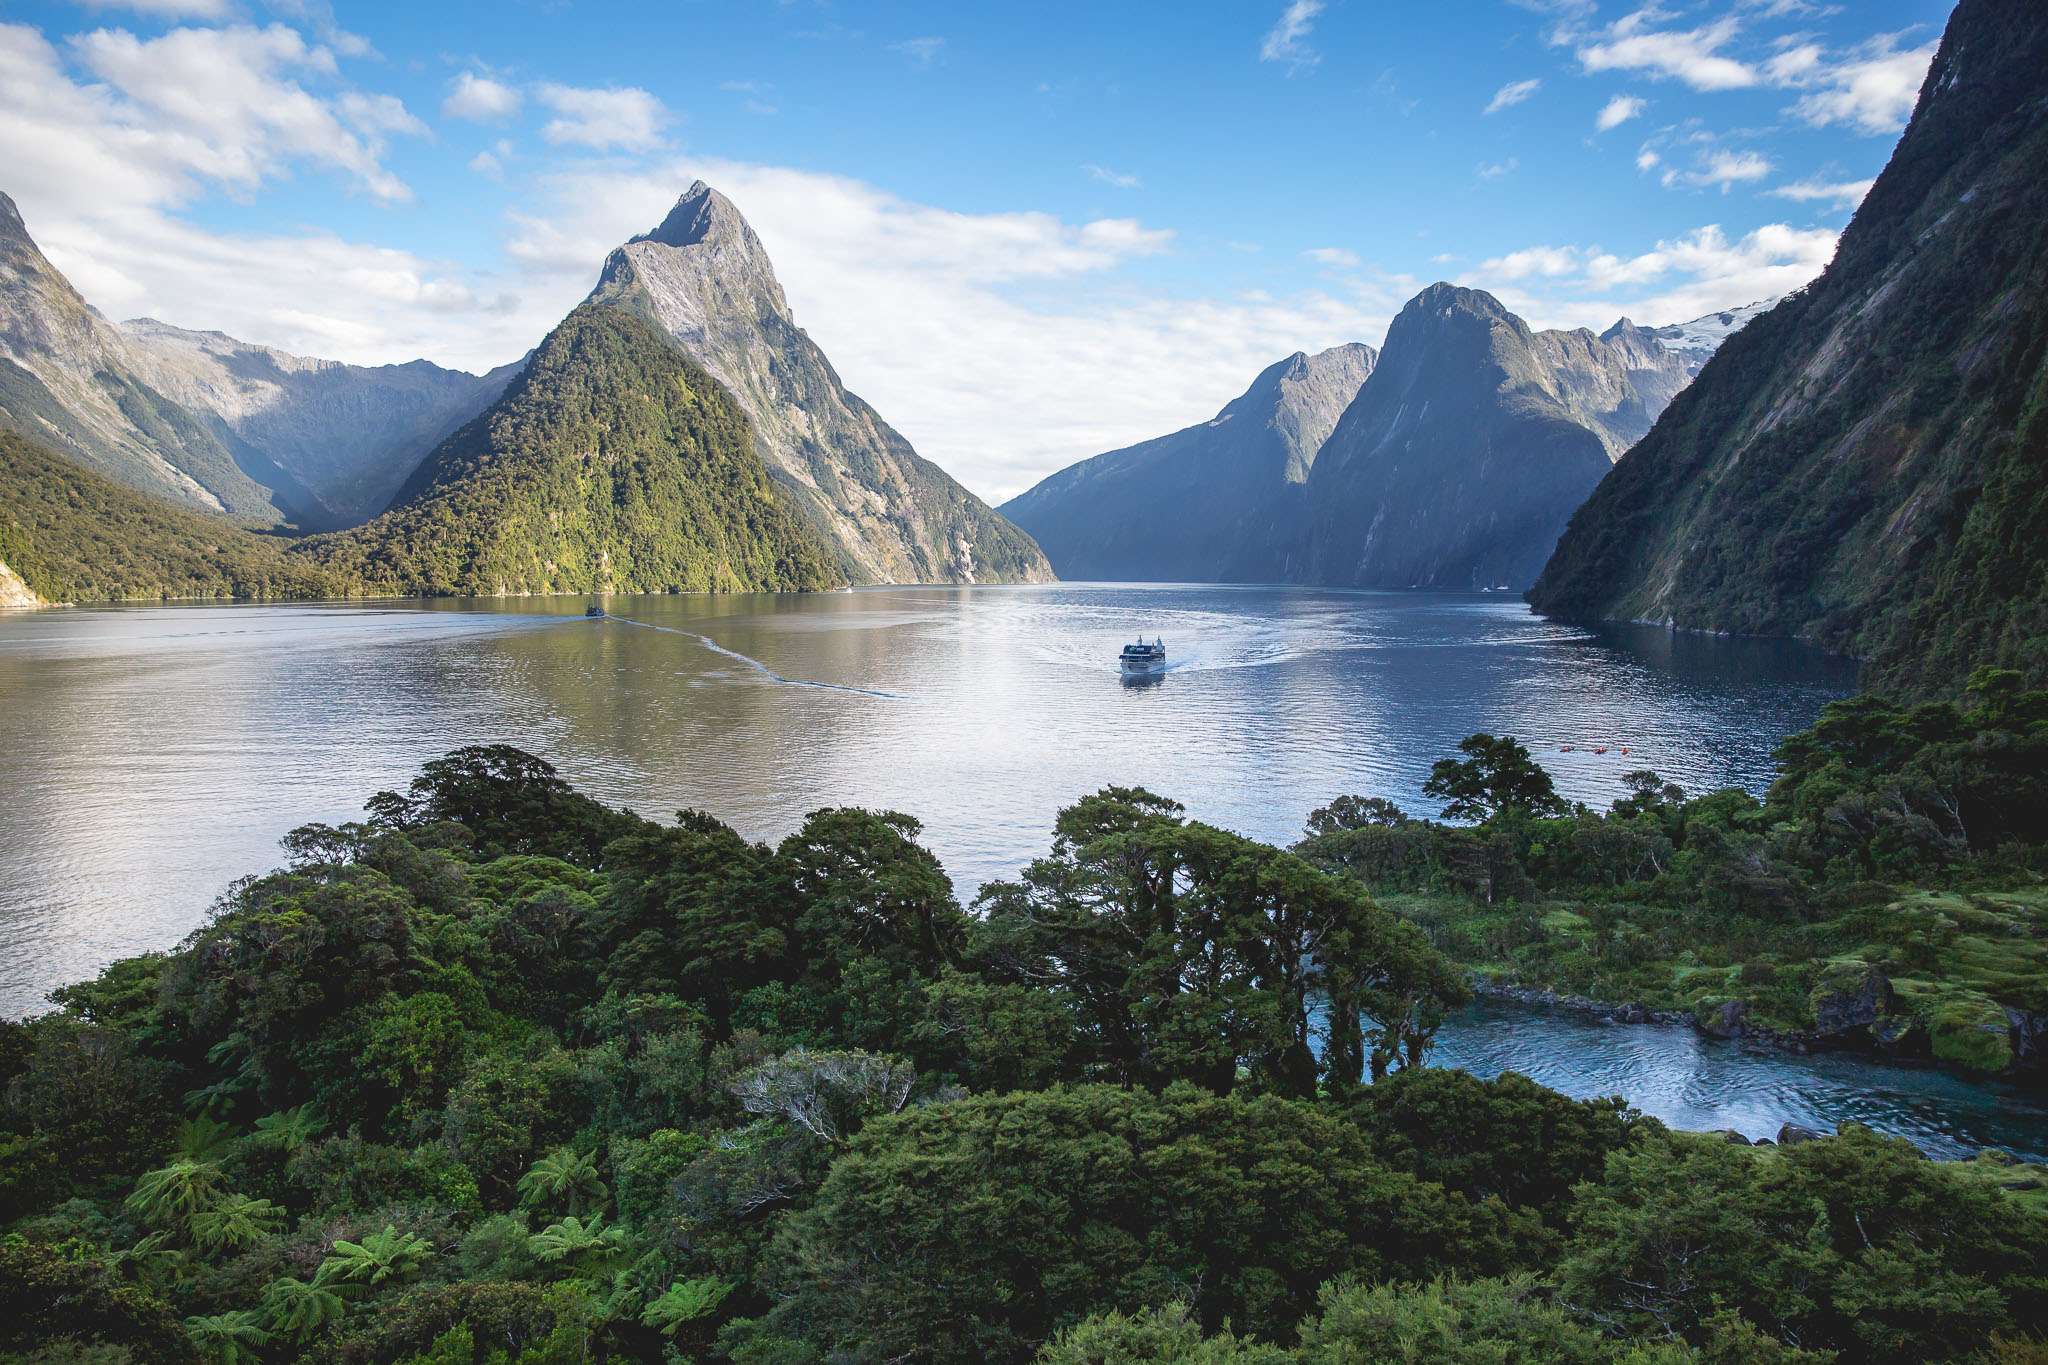 Milford Sound and Mitre Peak from a distance